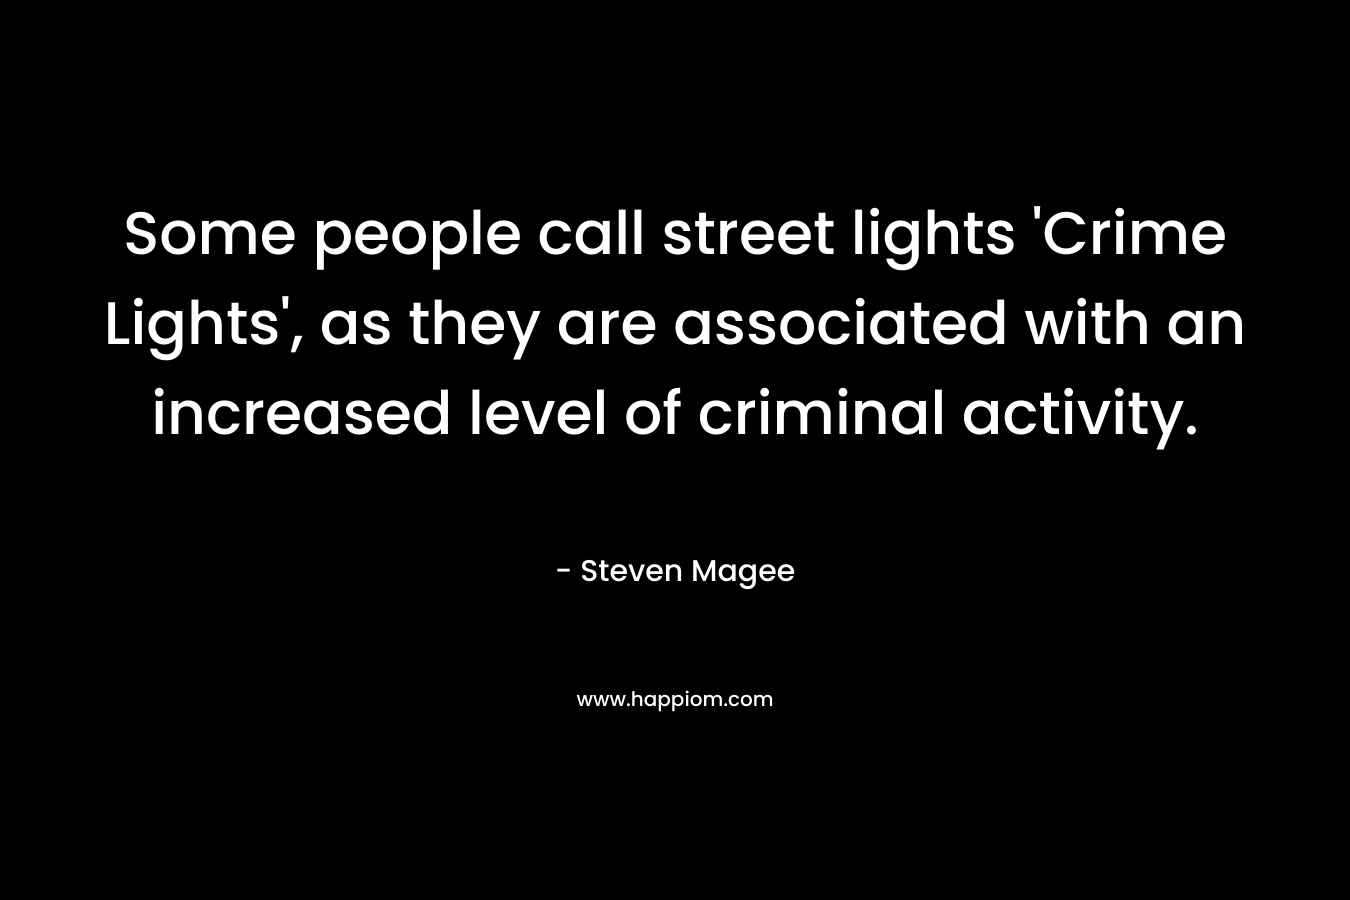 Some people call street lights 'Crime Lights', as they are associated with an increased level of criminal activity.